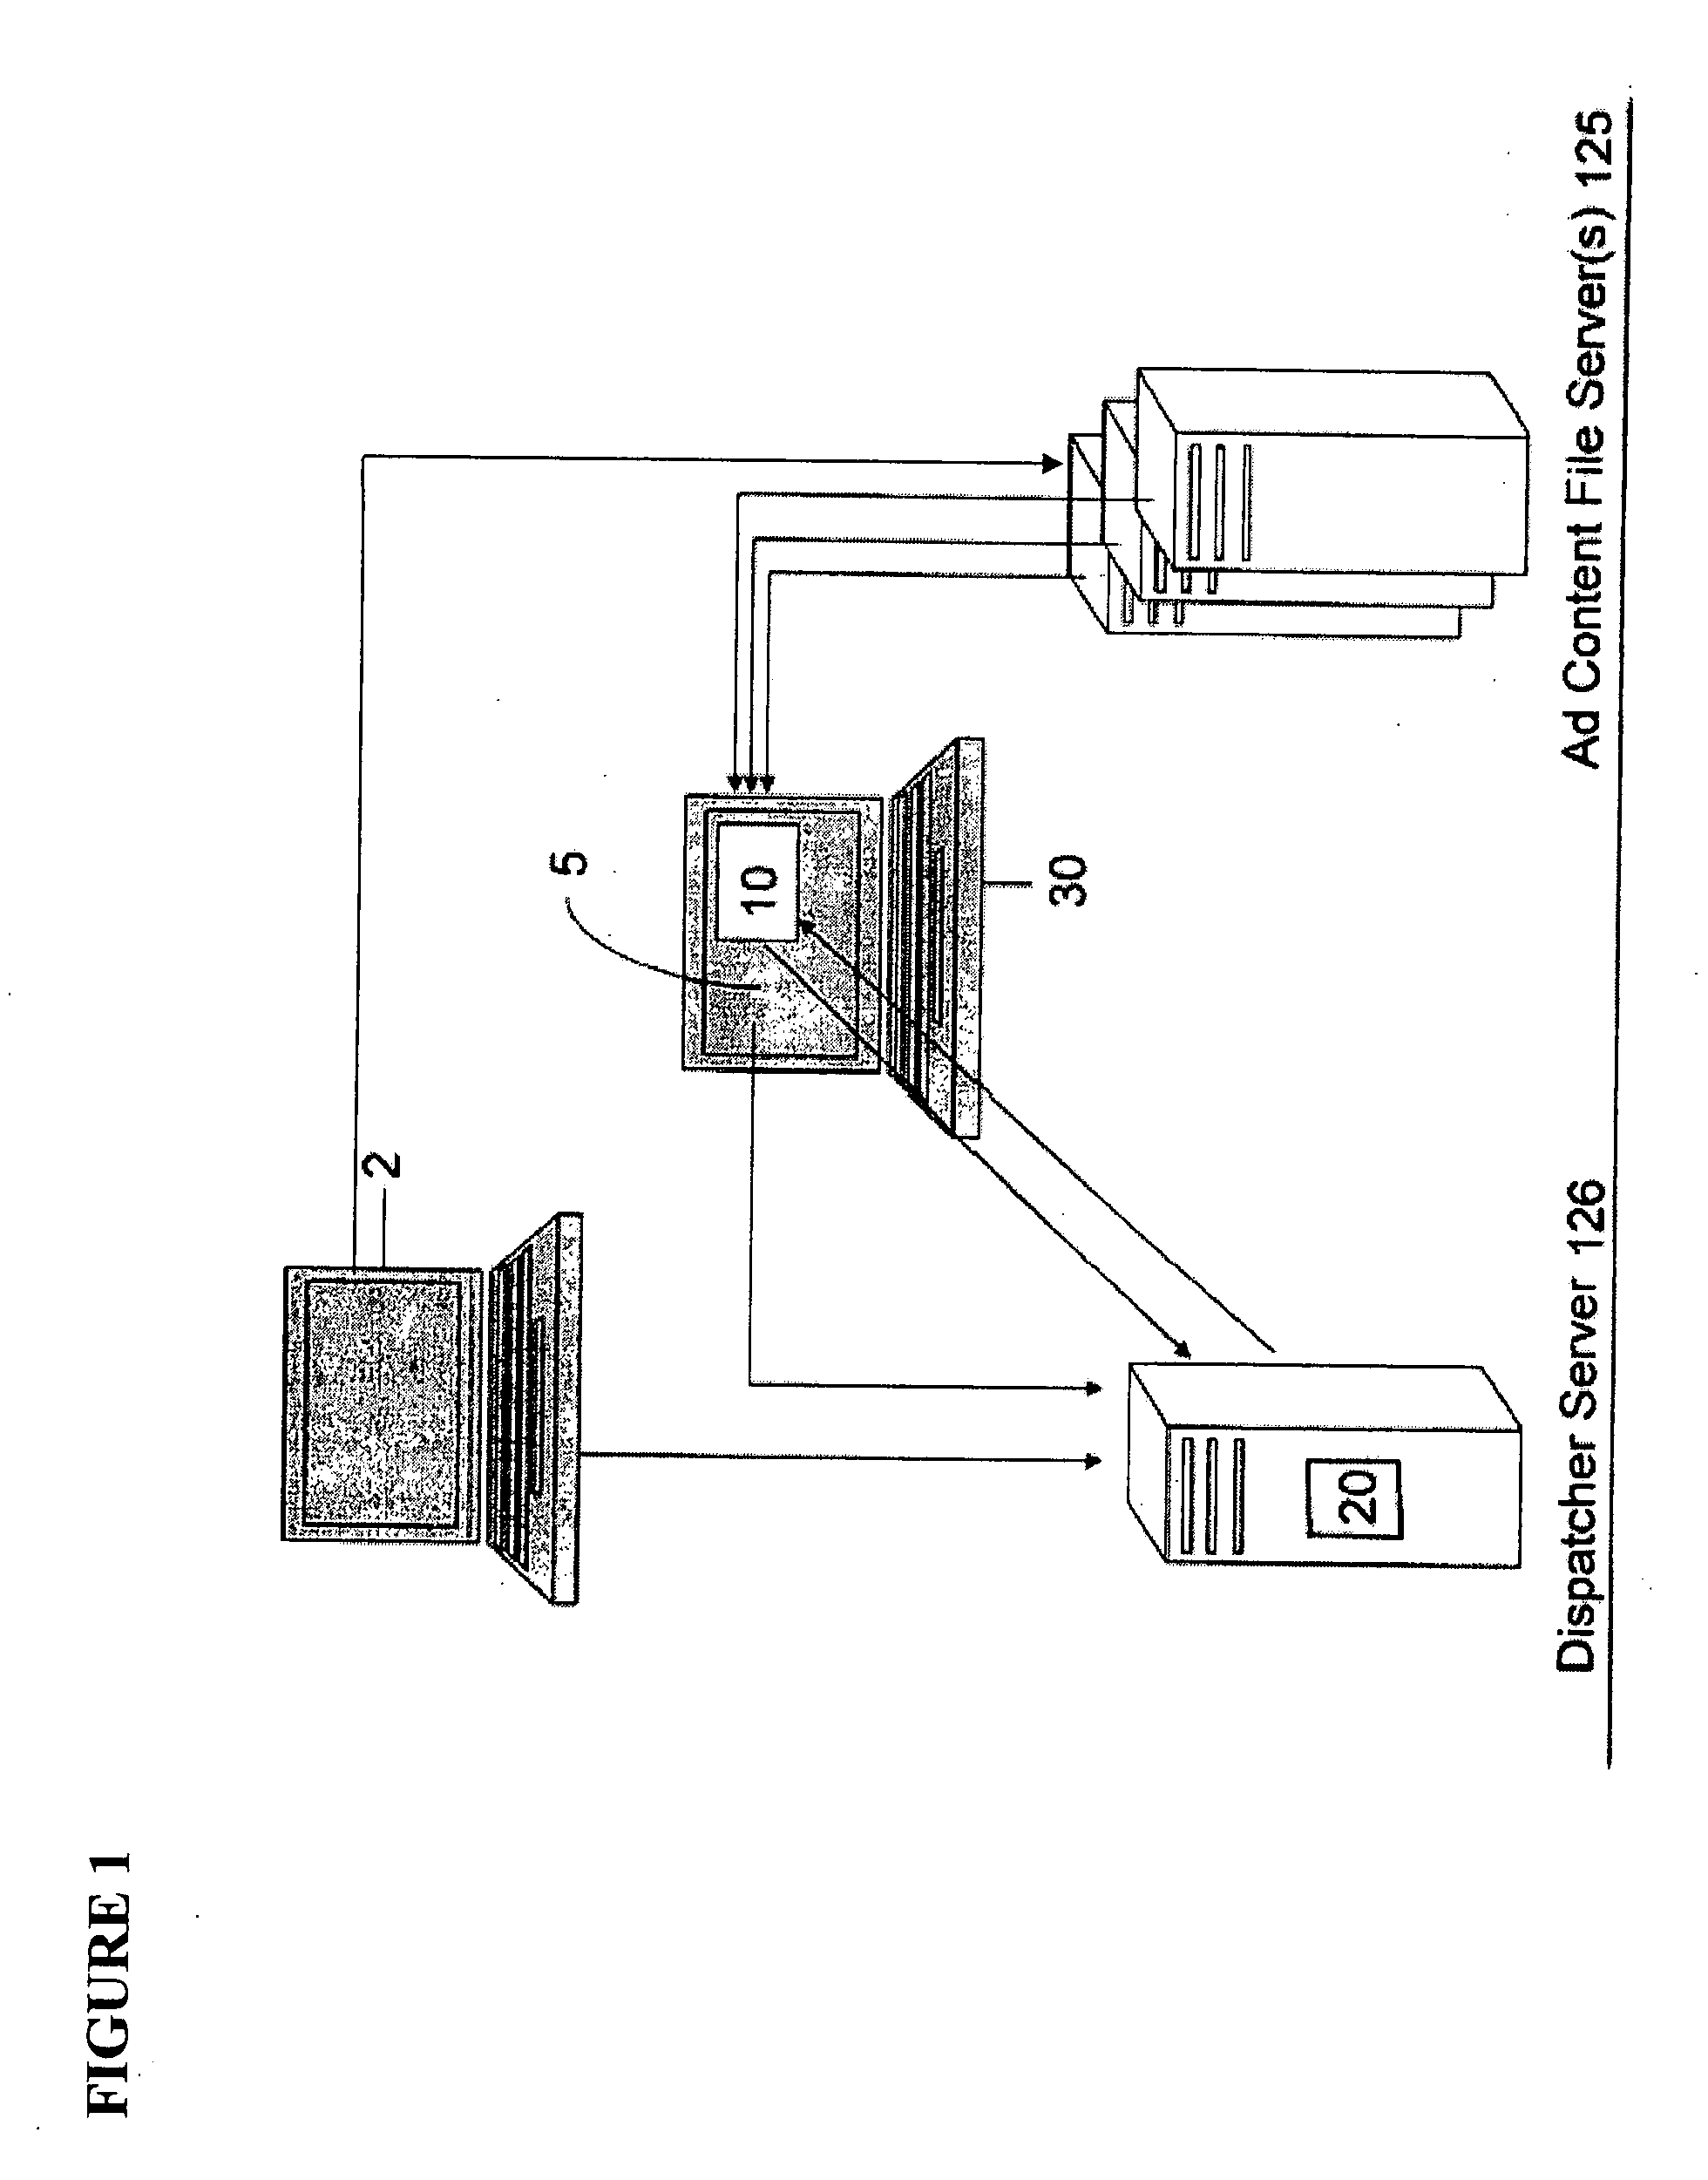 System and method for creation, distribution and tracking of advertising via electronic networks